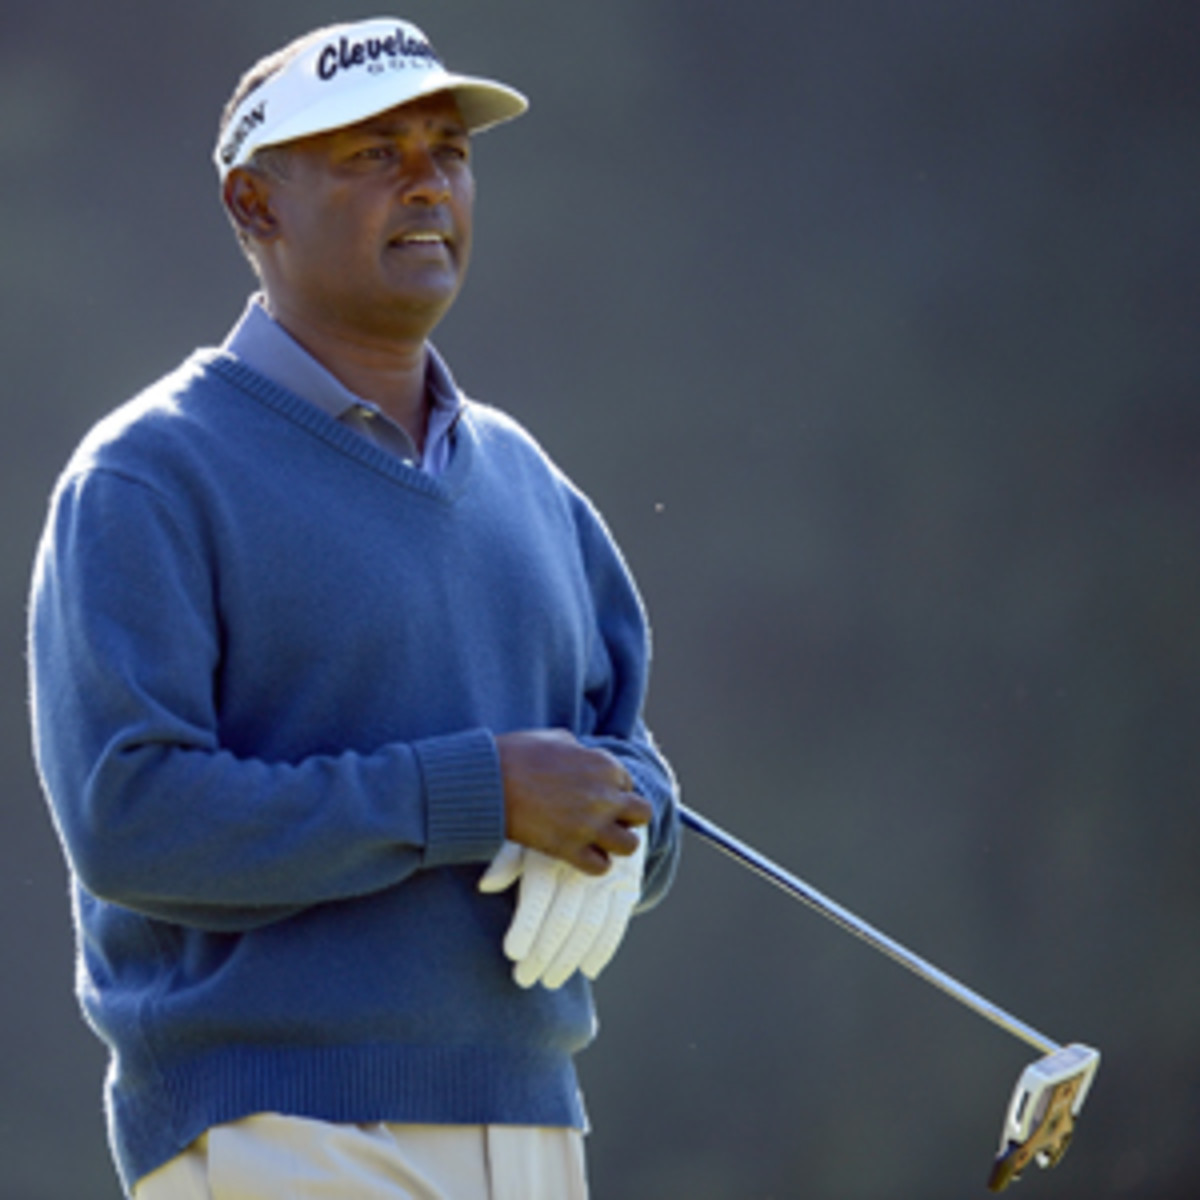 Vijay Singh admitted to using a banned substance in deer antler spray in January. (Harry How/Getty Images)